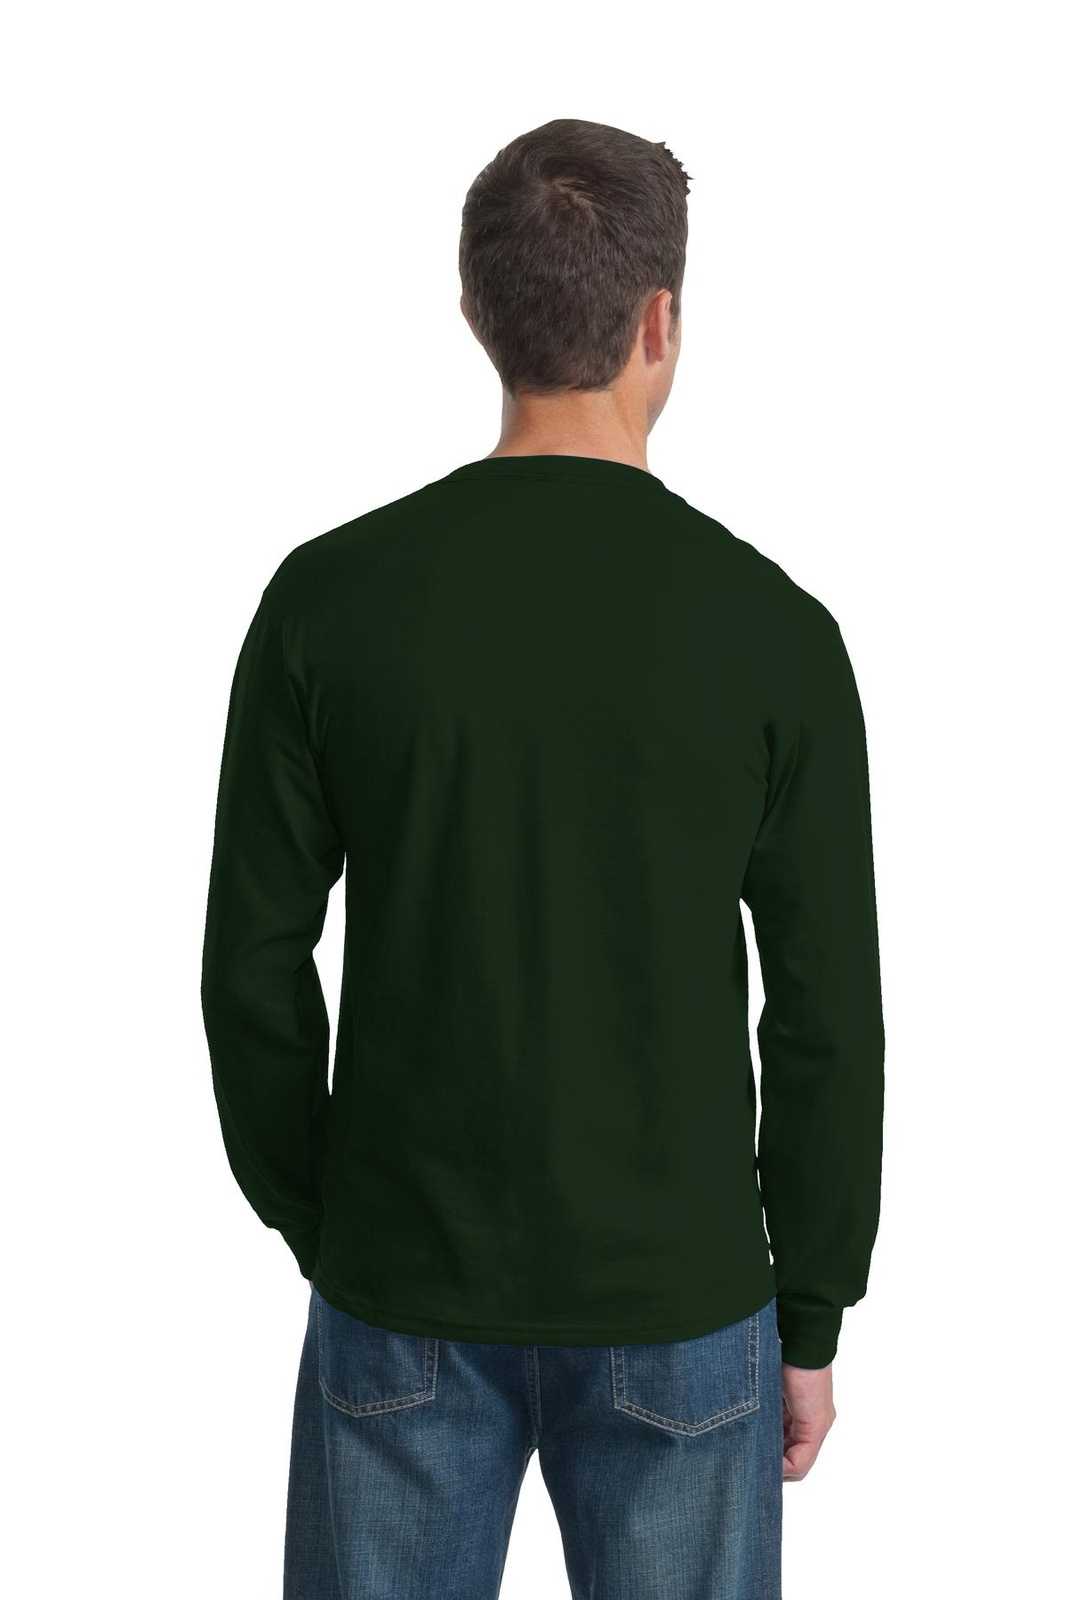 Fruit of the Loom 4930 HD Cotton 100% Cotton Long Sleeve T-Shirt - Forest Green - HIT a Double